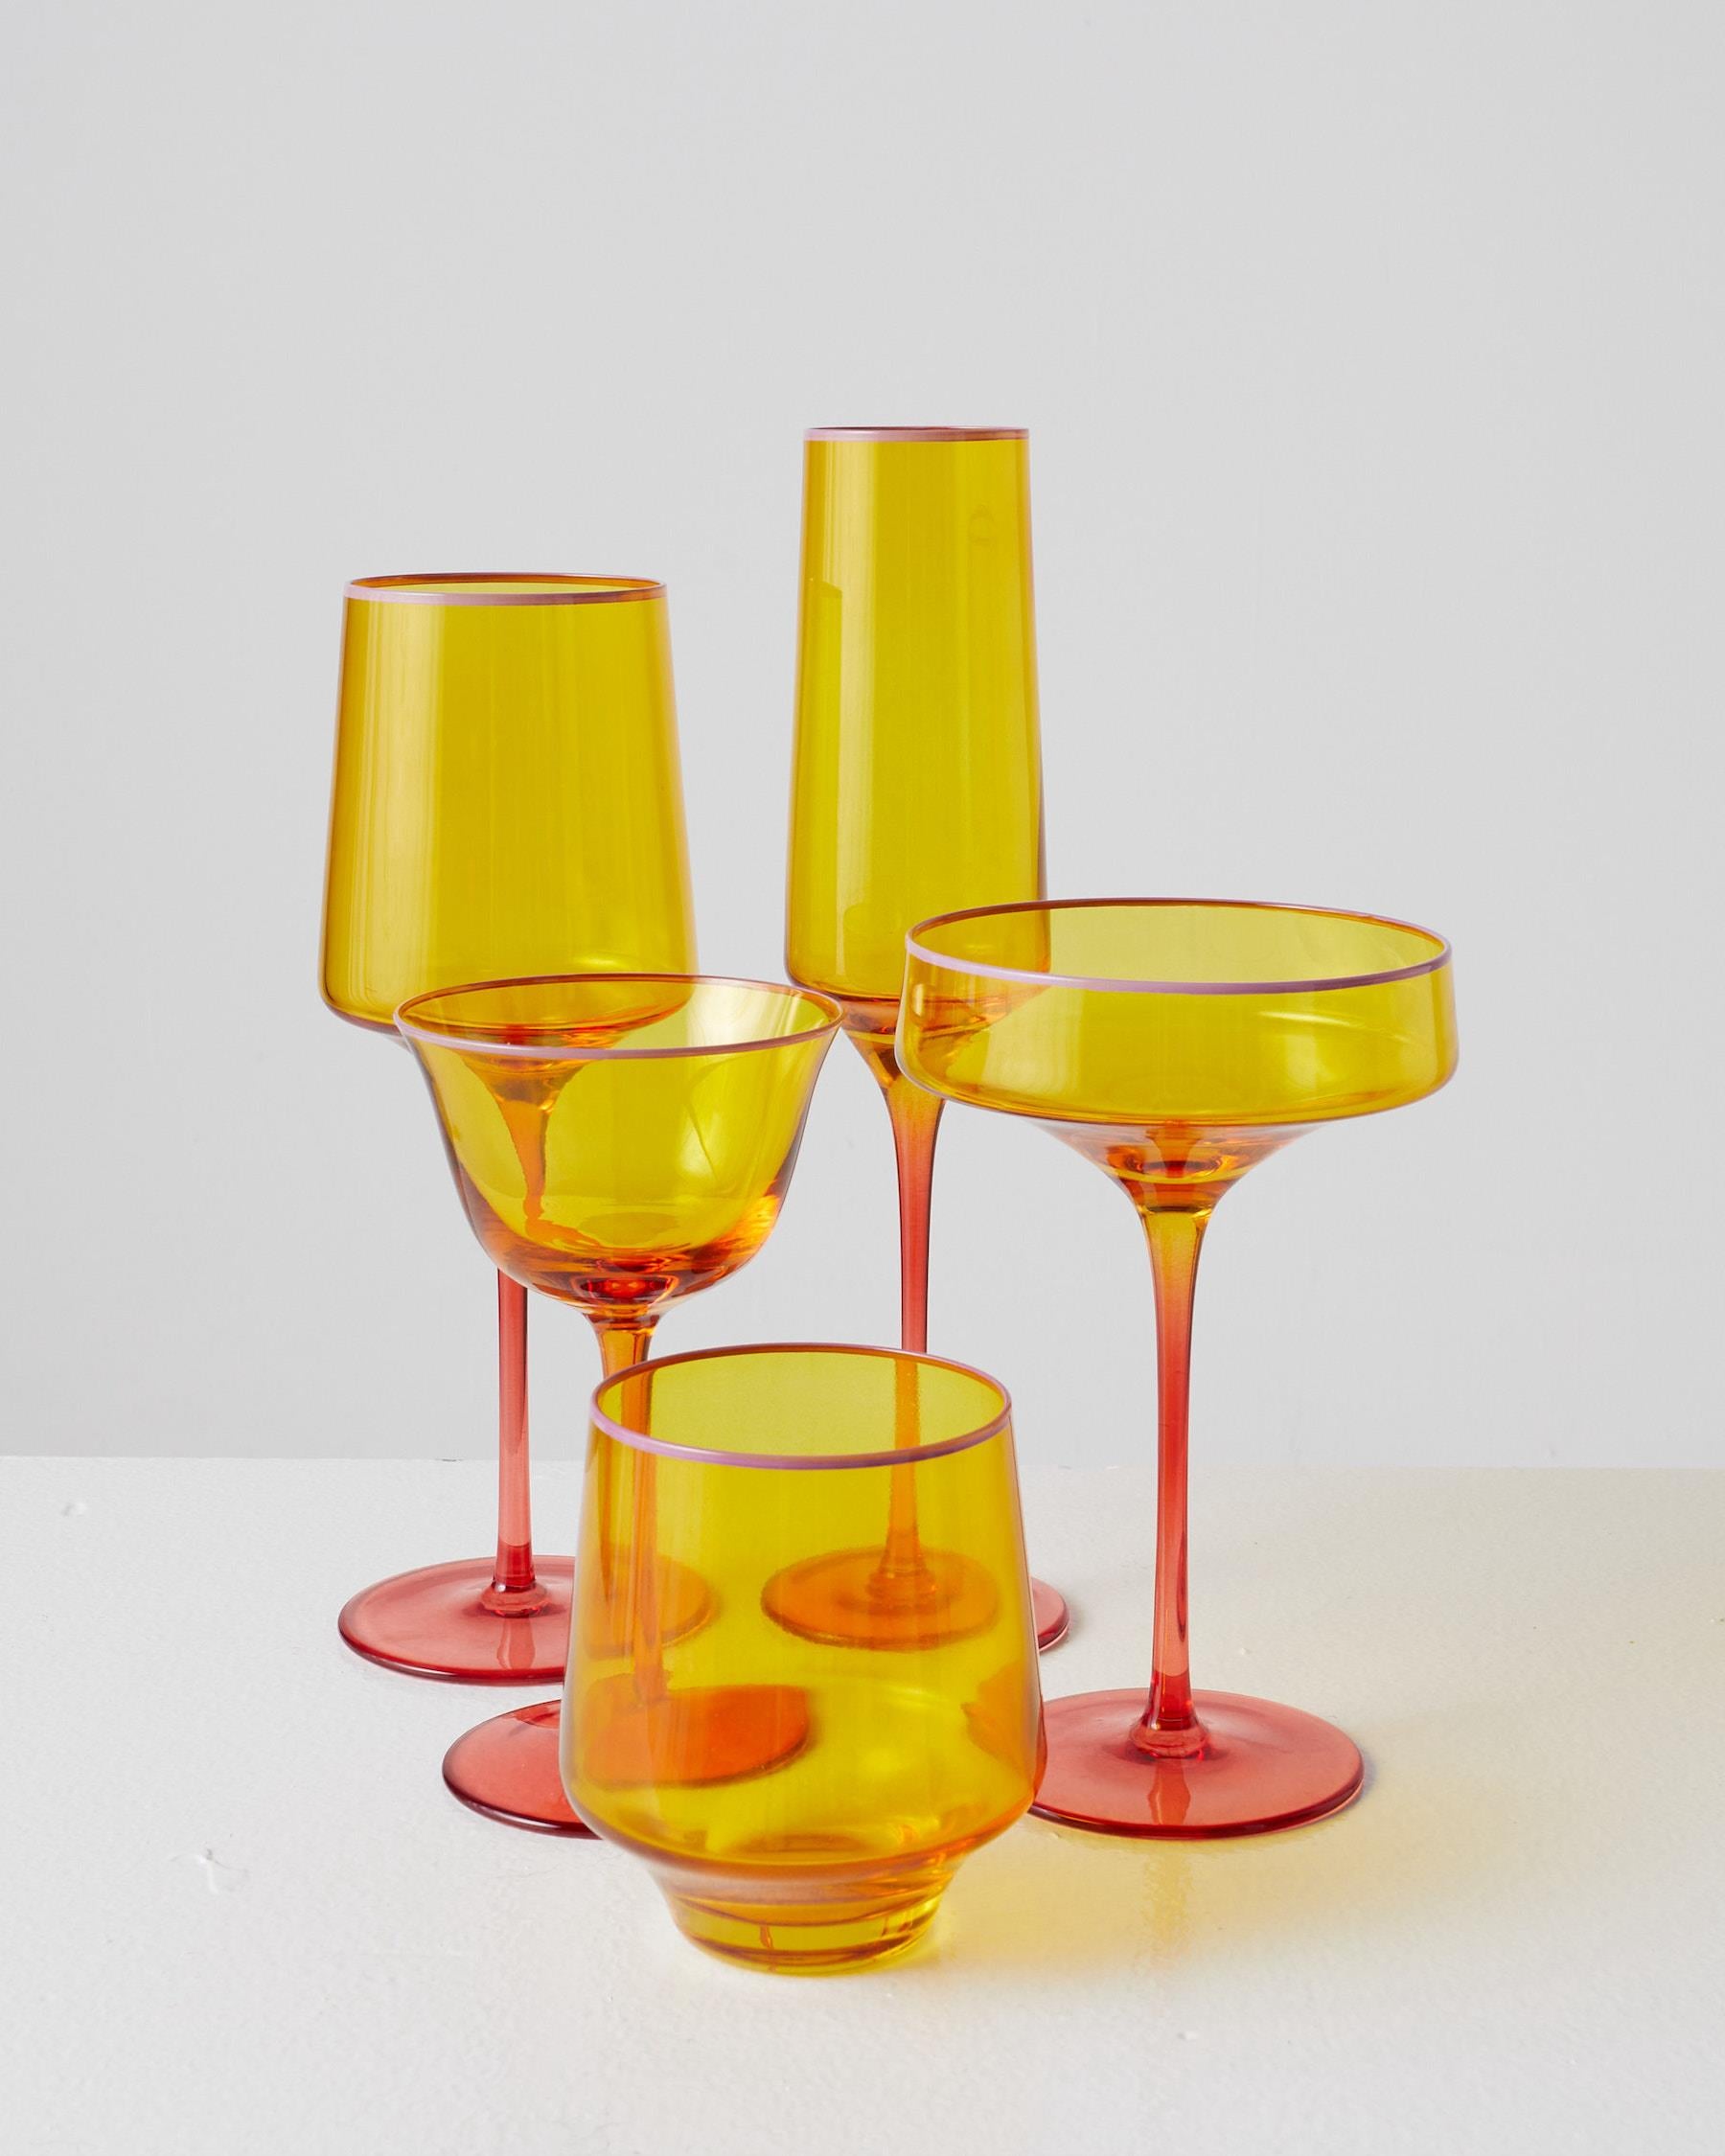 Tropical Punch Vino Glass - set of 2